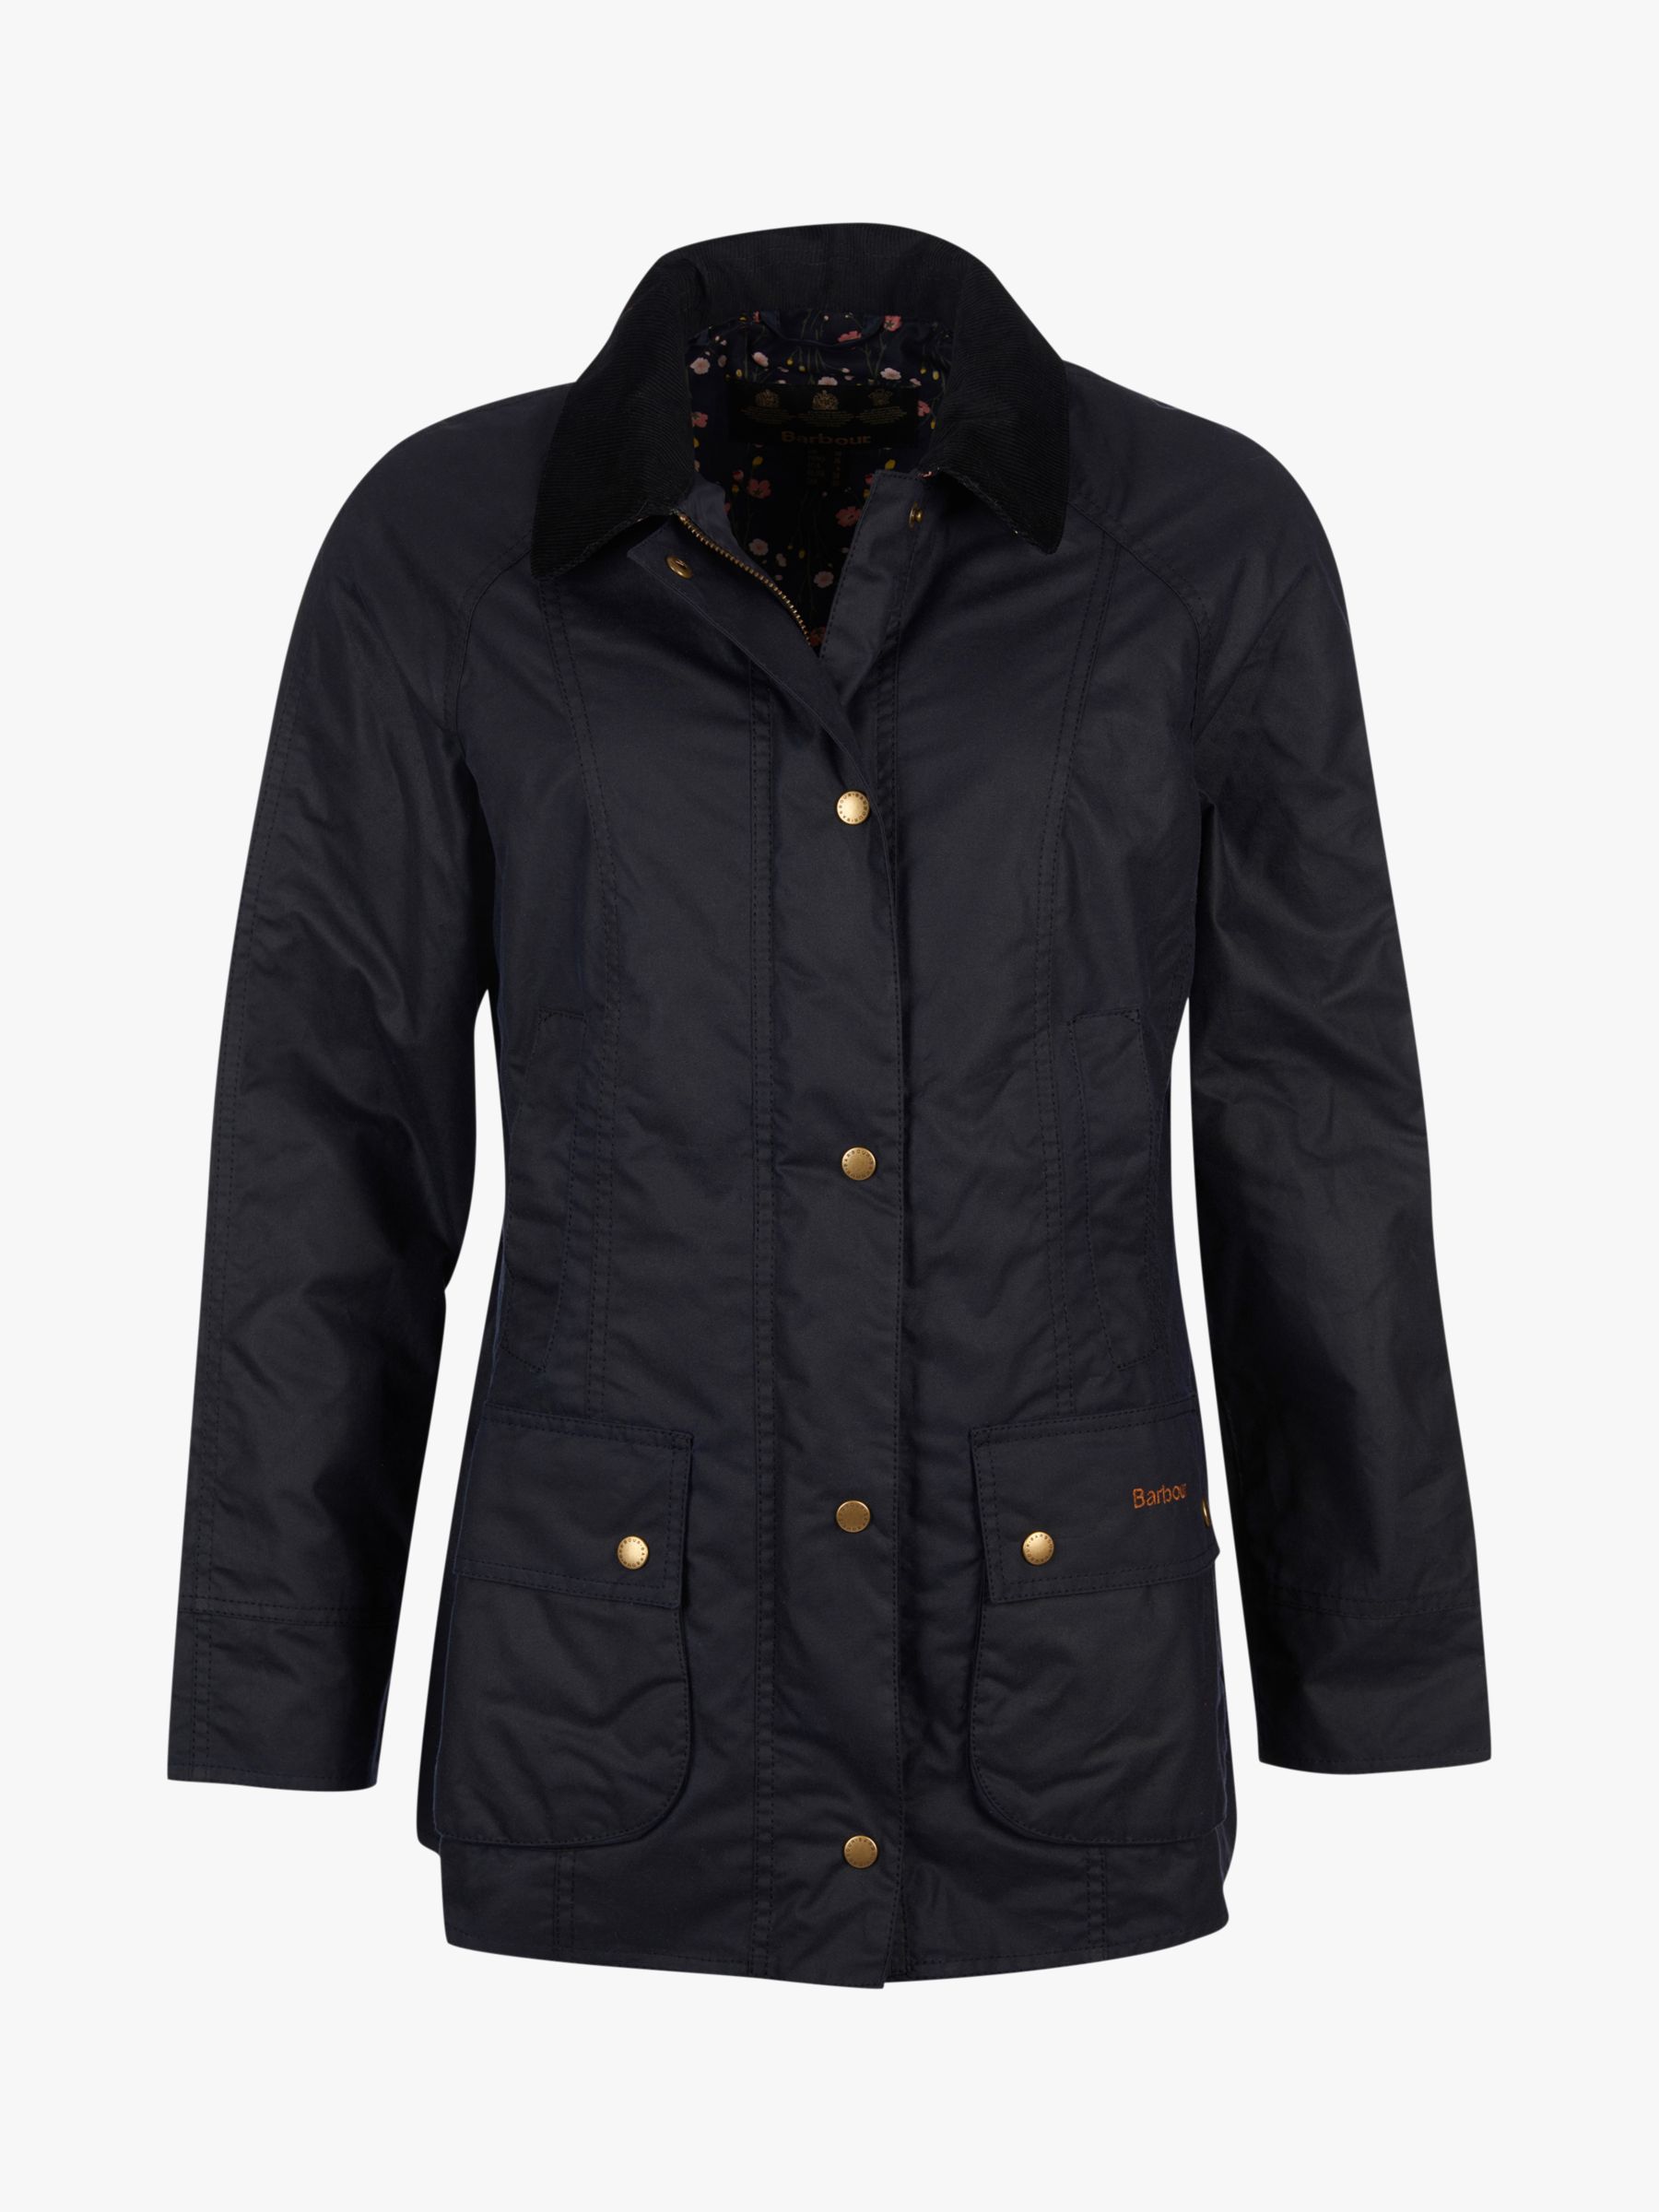 Barbour Kyloe Waxed Print Lined Jacket 